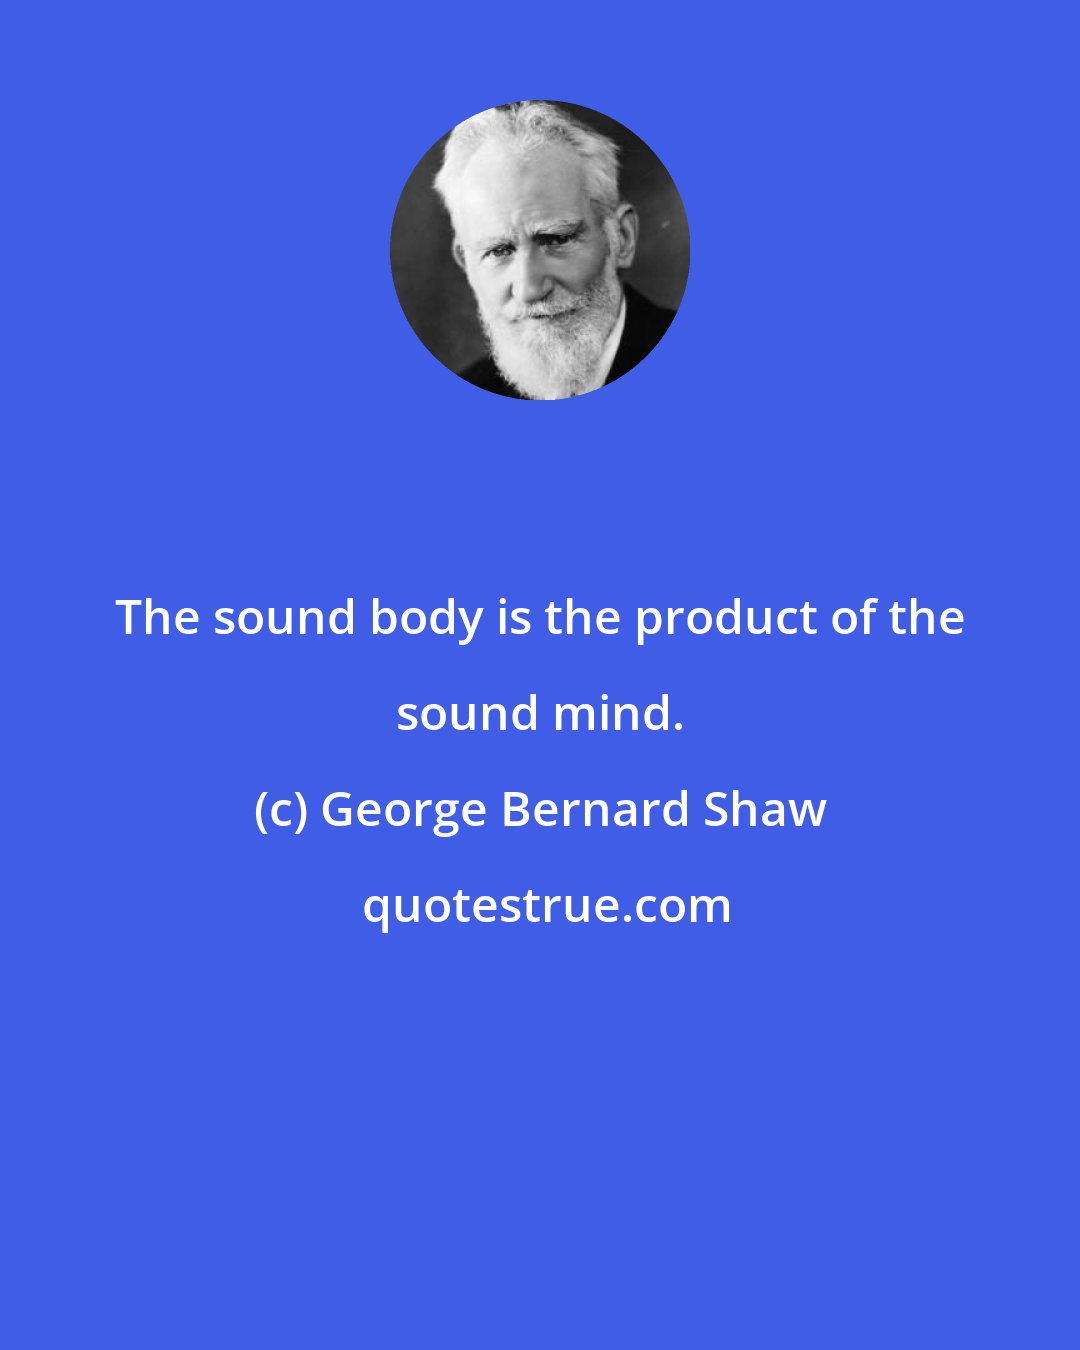 George Bernard Shaw: The sound body is the product of the sound mind.